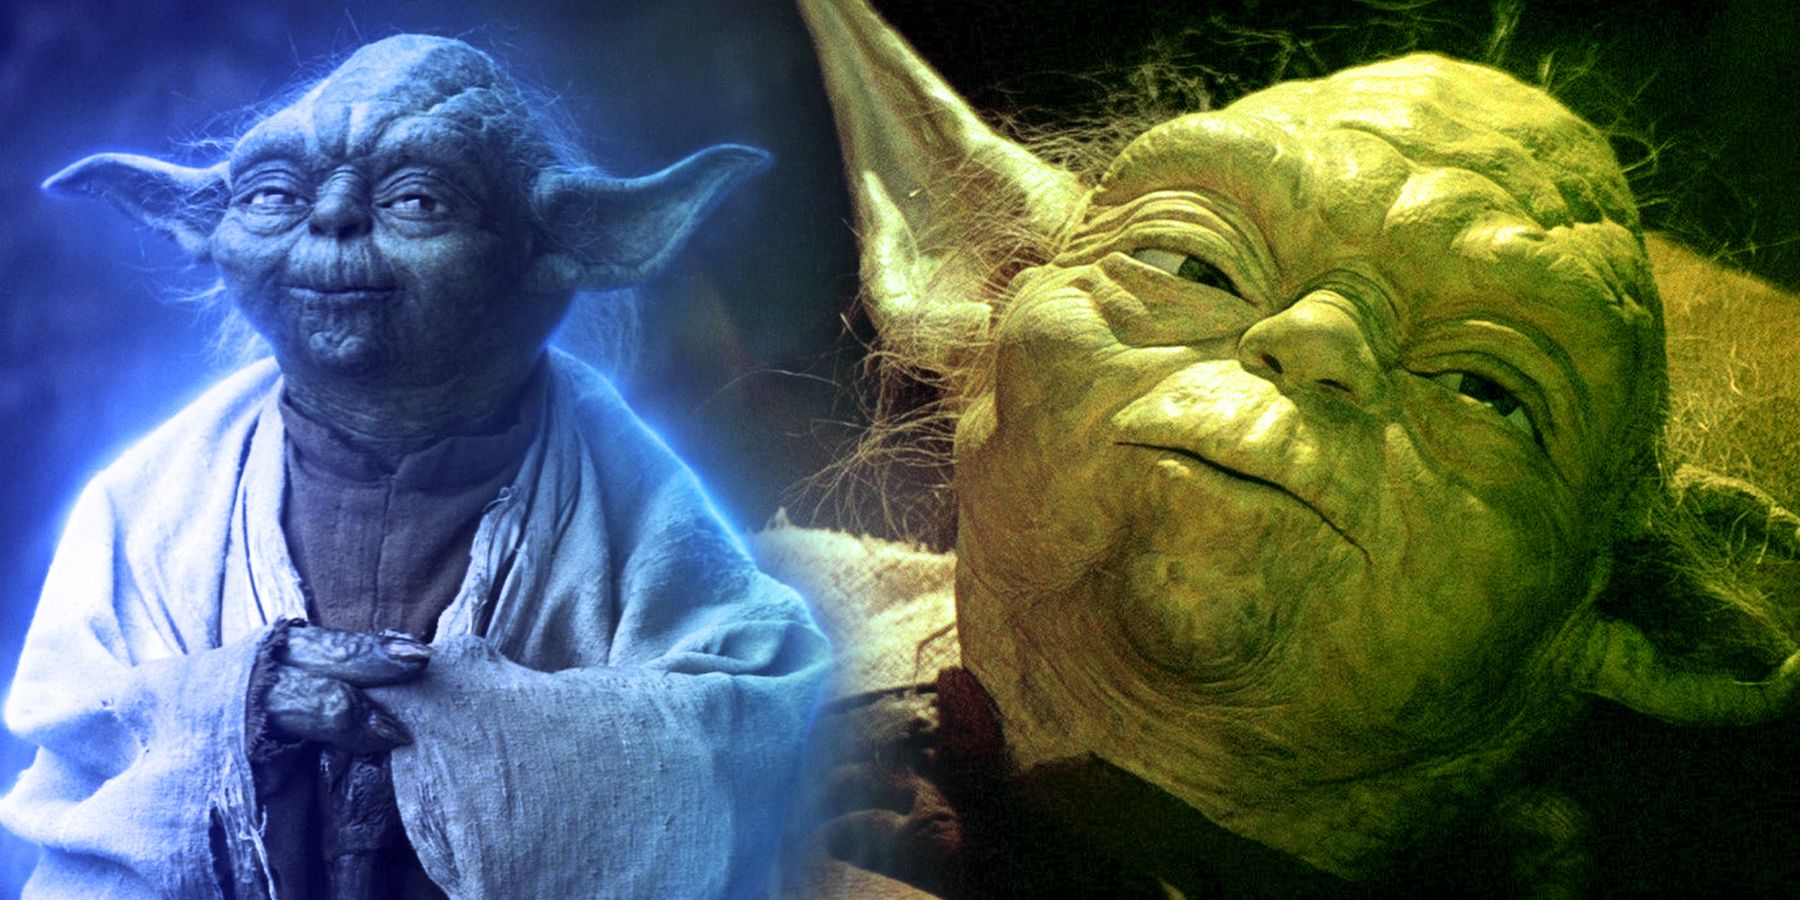 Yoda smiles thoughtfully in 2019's The Last Jedi. On the left, Yoda speaks his last words to Luke in Return of the Jedi.